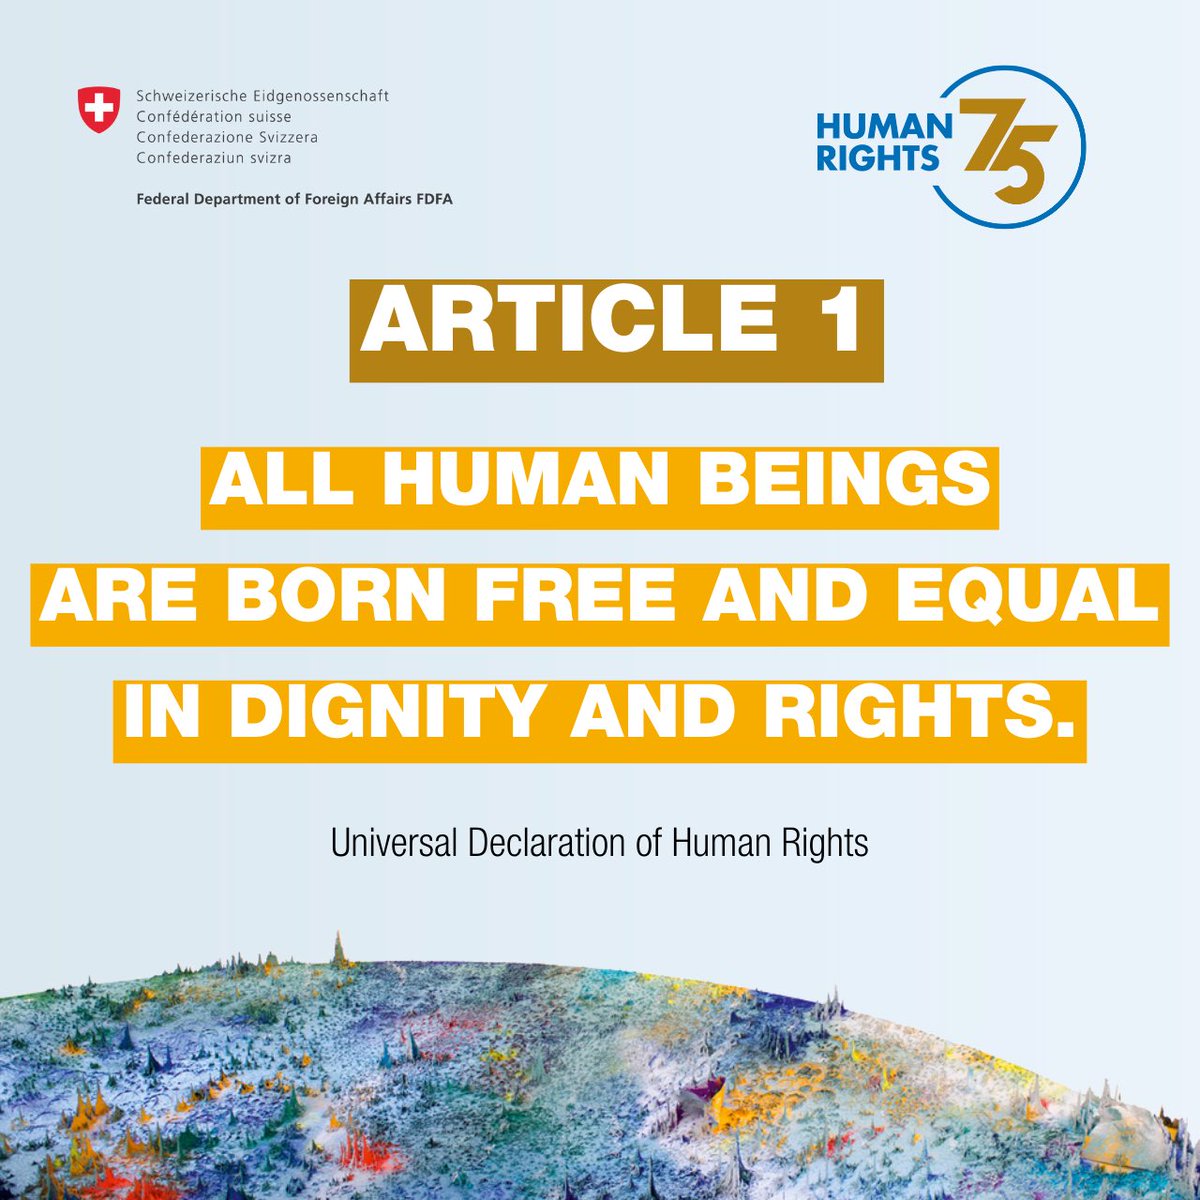 Today, #Switzerland 🇨🇭 joins @UNHumanRights 🇺🇳 in marking 75 years of #HumanRights. Without respect for human rights there can be no sustainable #peace 🕊️ Let us use the #UDHR as a compass to rise to the challenges of today, for a better tomorrow. #HumanRightsDay #HumanRights75